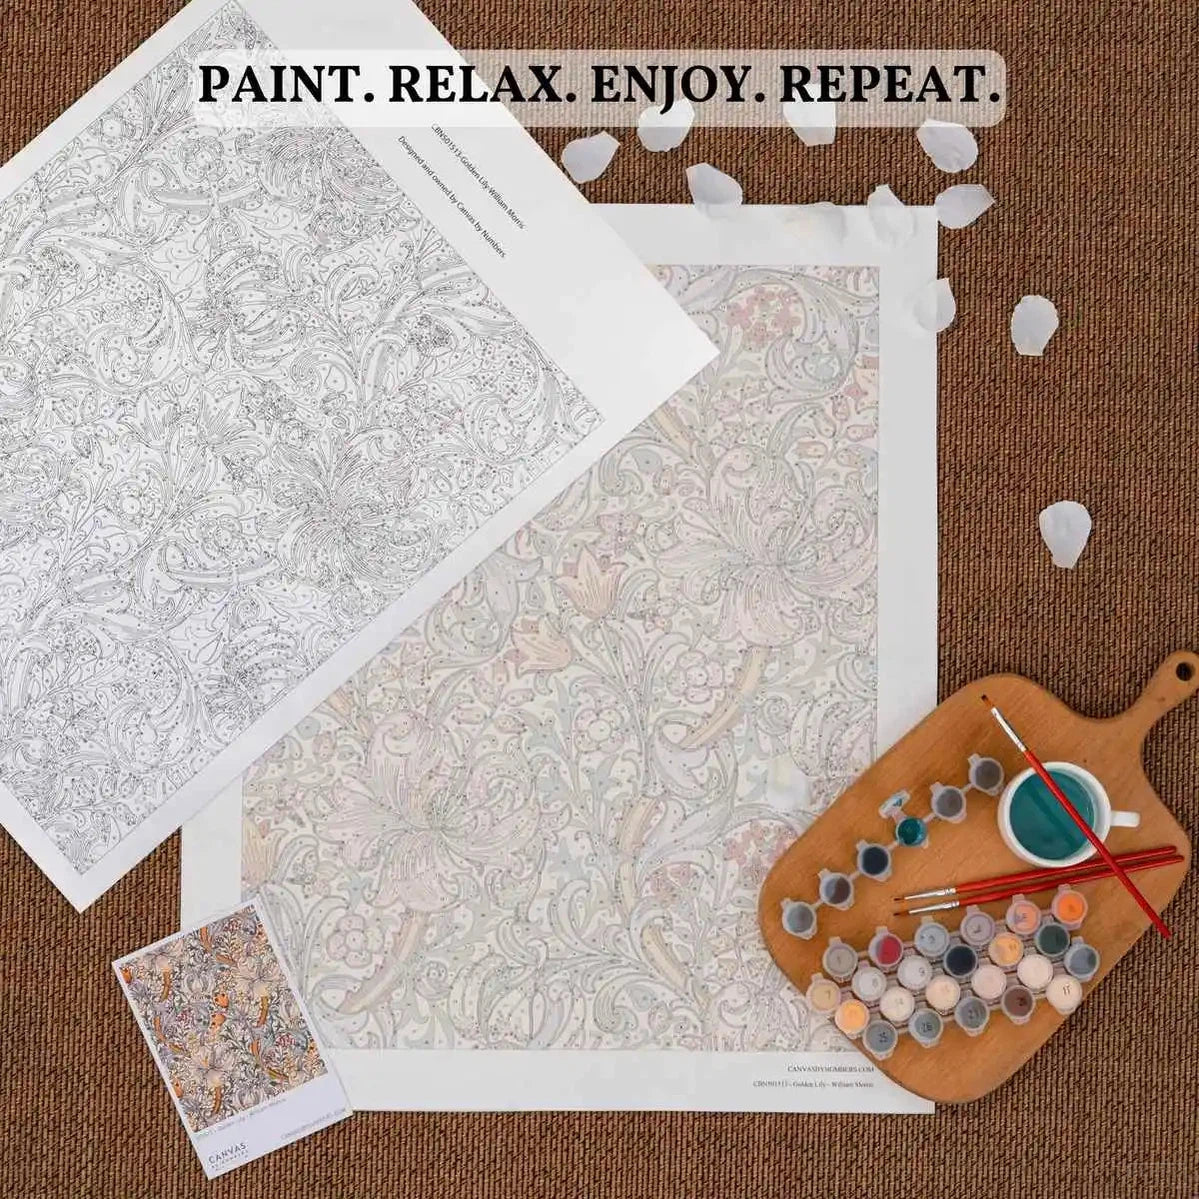 Paint by Number Kits for Kids, Framed Canvas Artwork - Pack Of 4 - 8x8